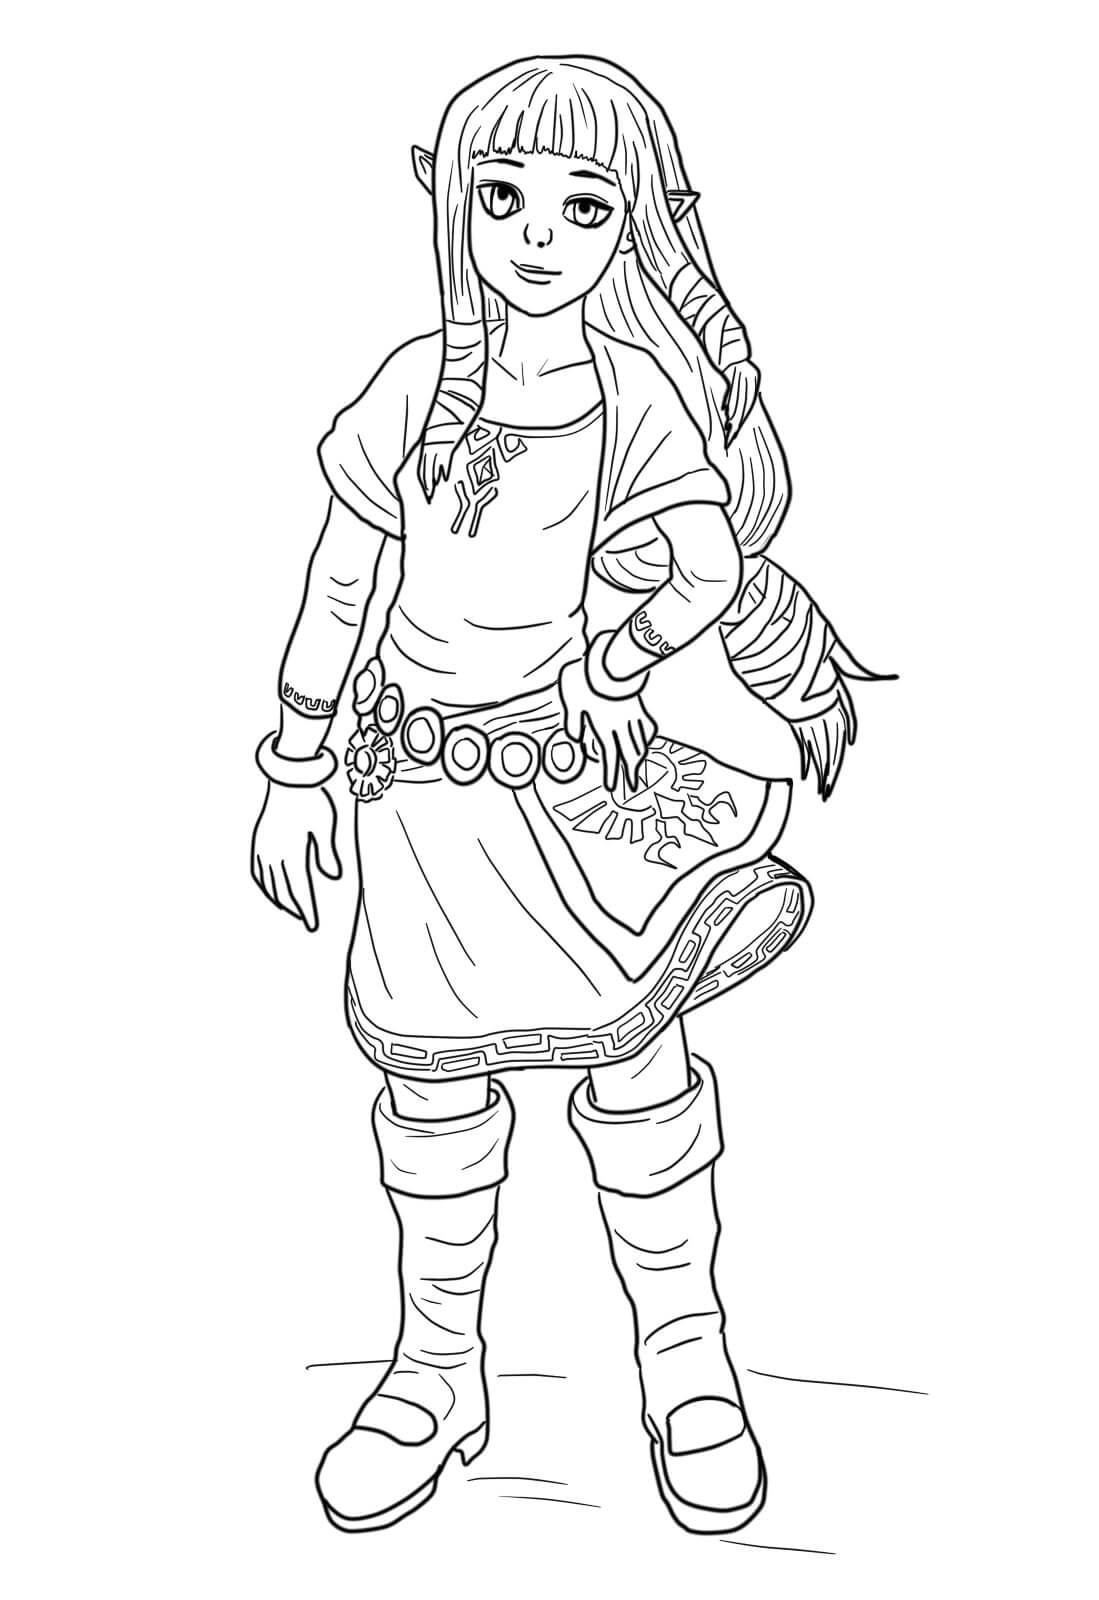 Young Zelda Coloring Page   Free Printable Coloring Pages for Kids